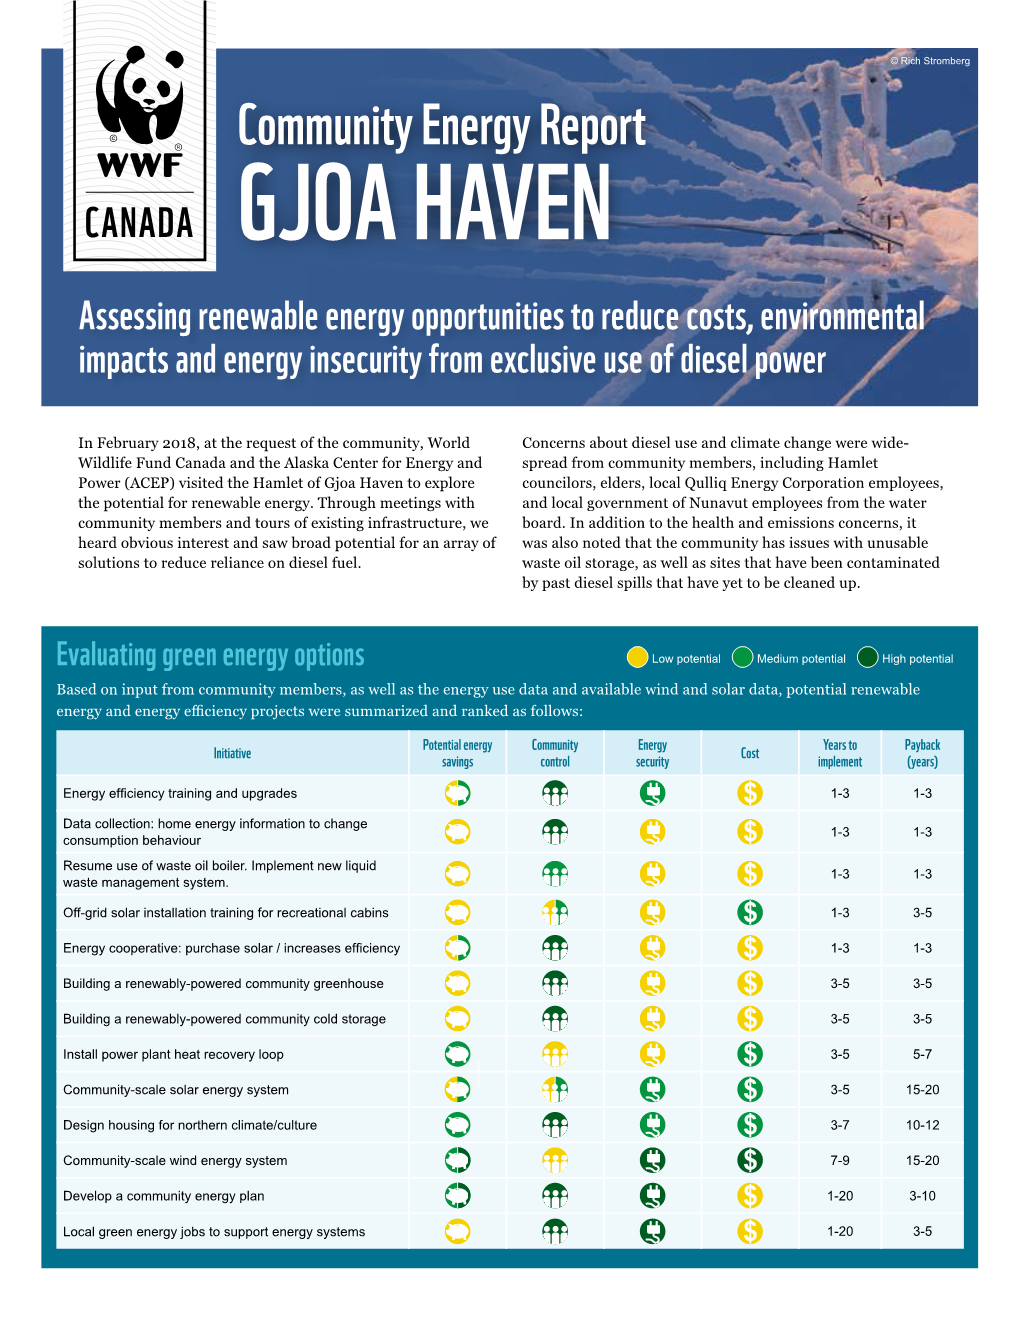 GJOA HAVEN Assessing Renewable Energy Opportunities to Reduce Costs, Environmental Impacts and Energy Insecurity from Exclusive Use of Diesel Power